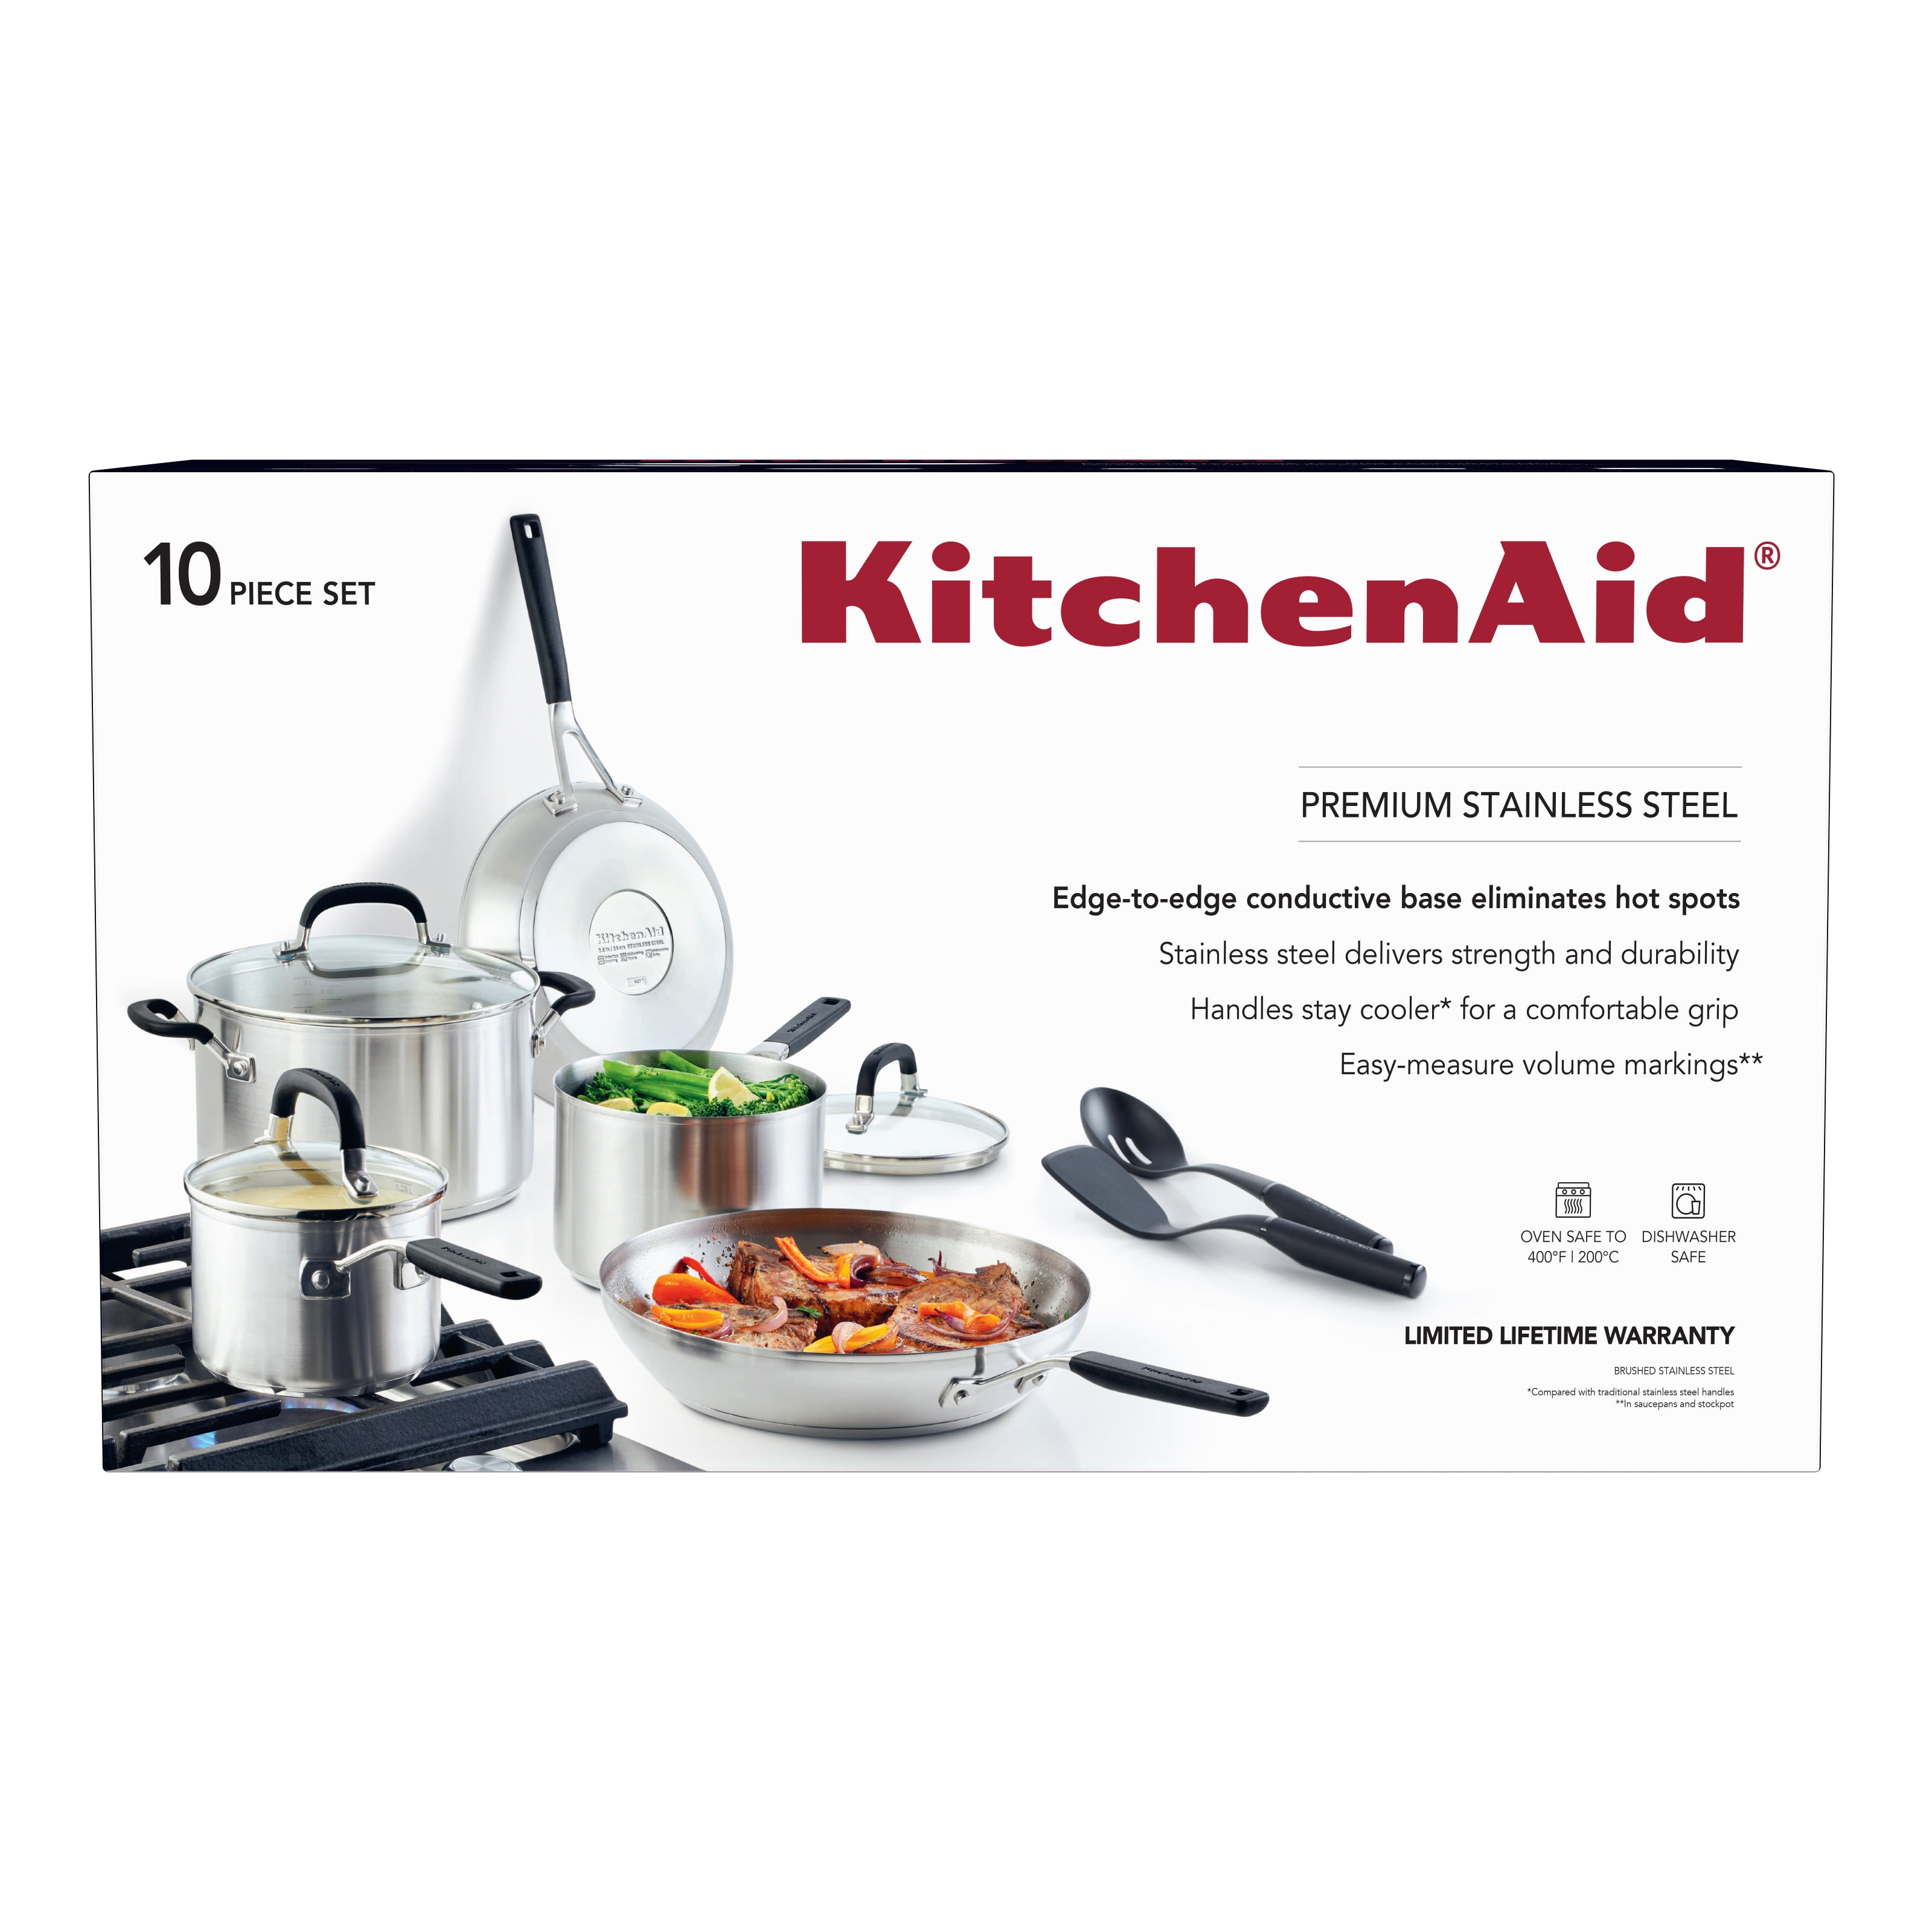 KitchenAid 5-Ply Clad Stainless Steel Cookware Induction Pots and Pans Set  · 10 Piece Set